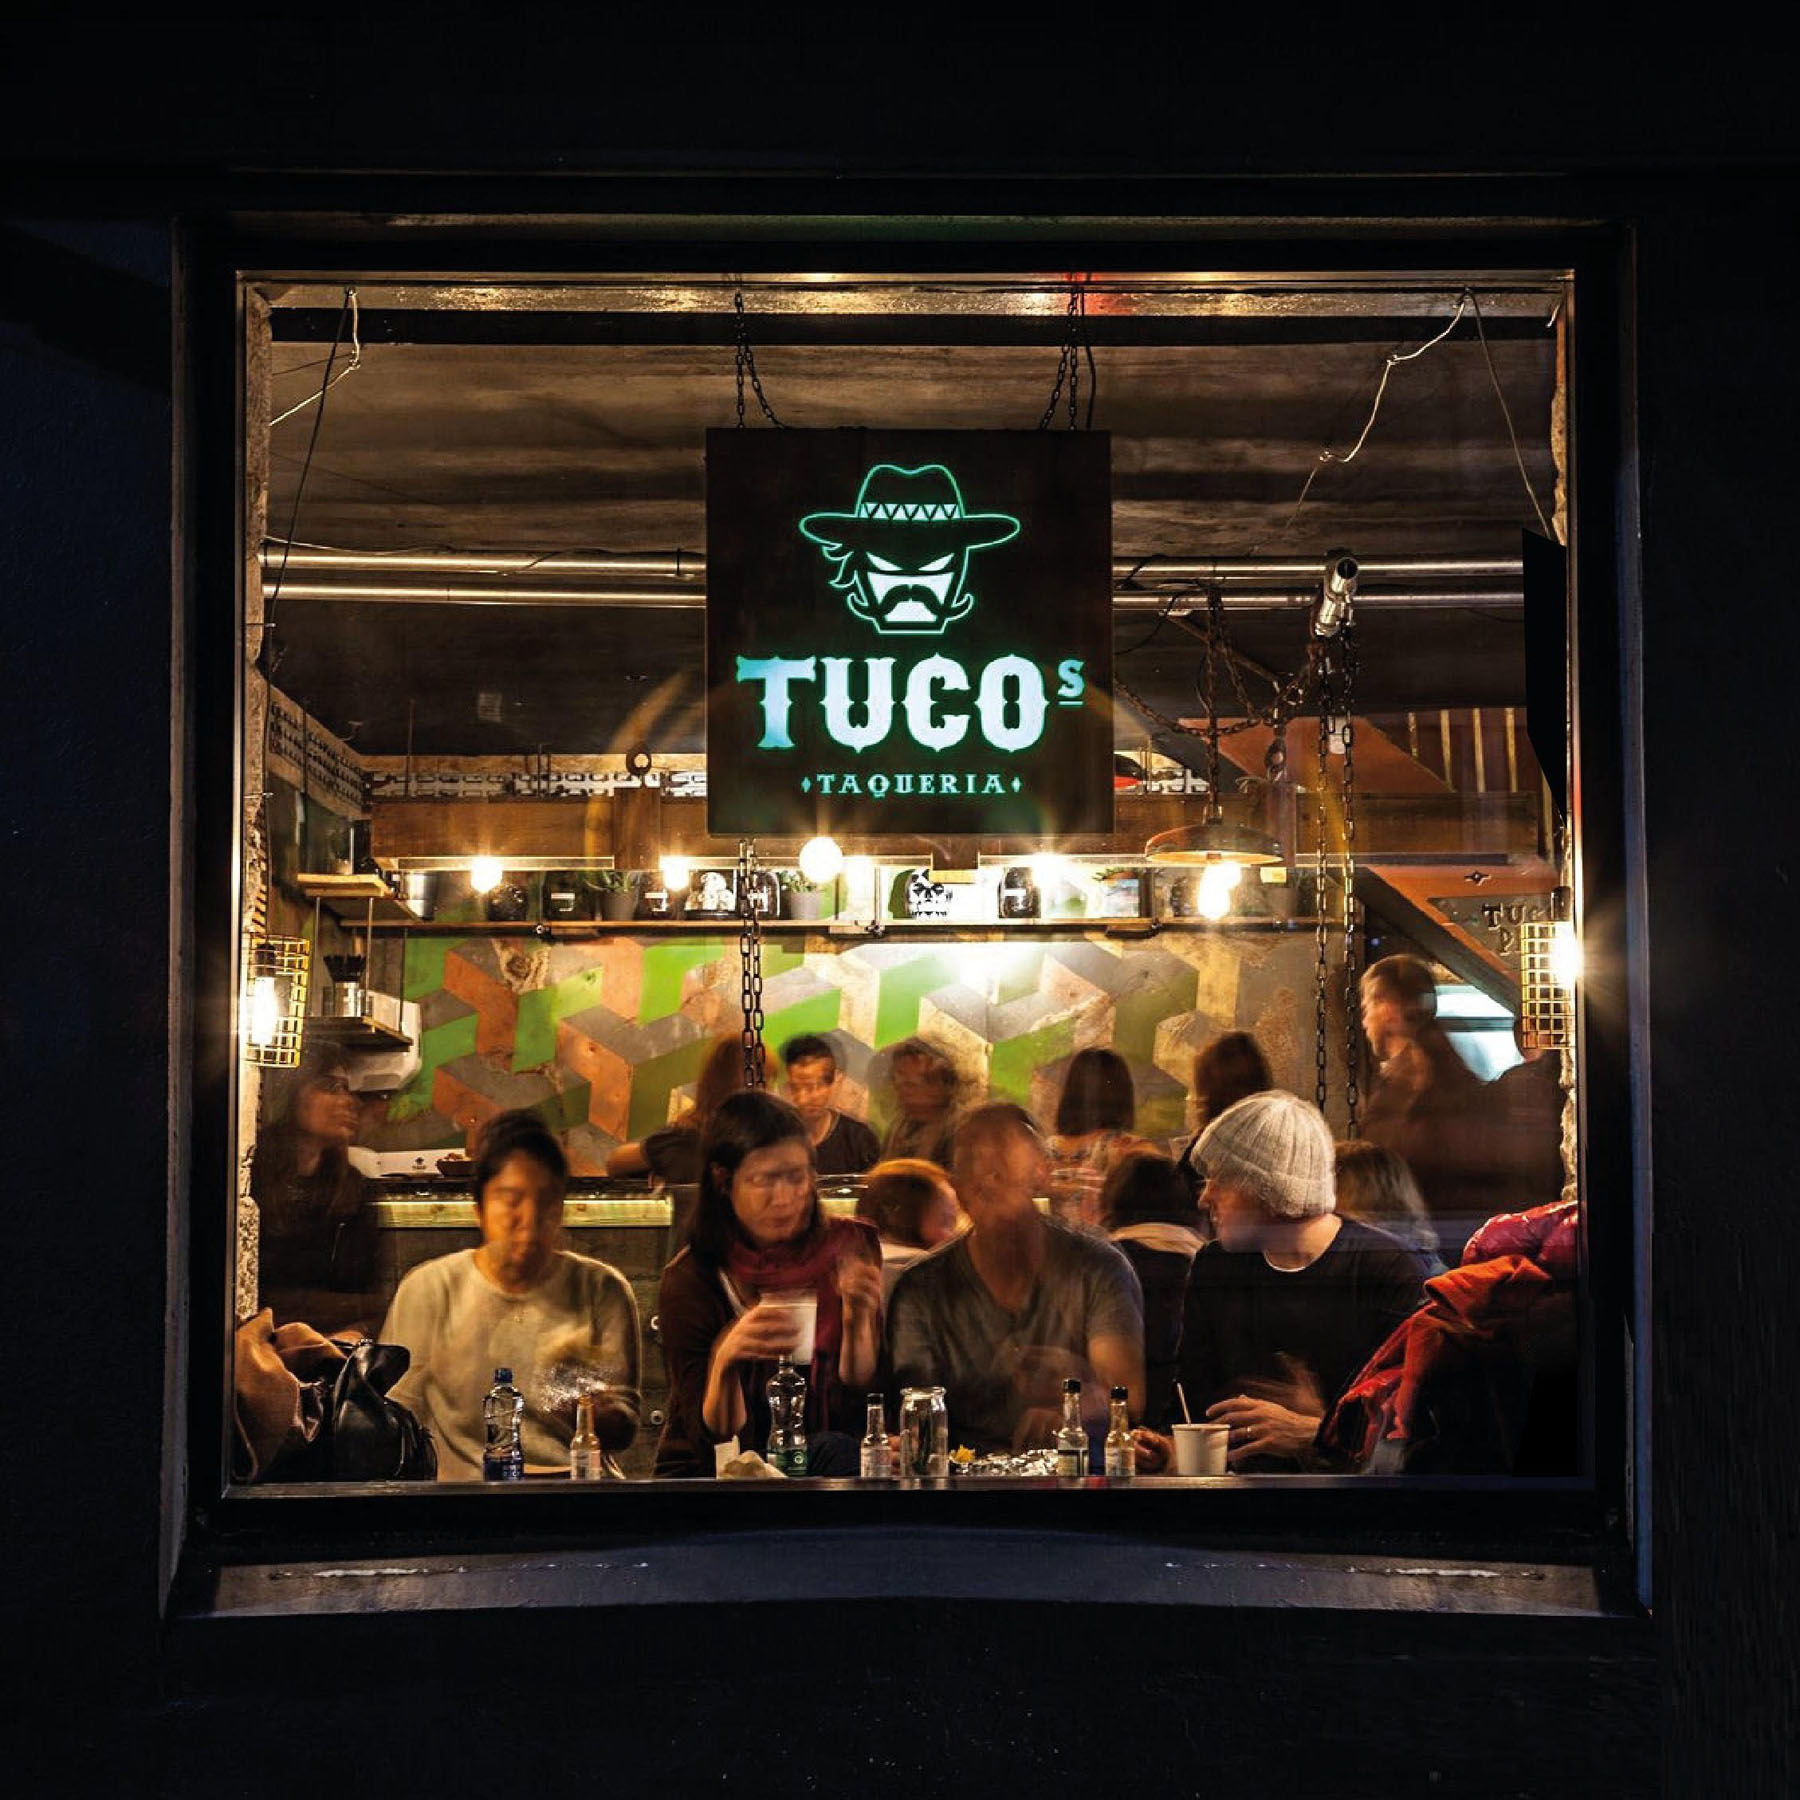 Online orders growing 120% YOY at award-winning Tuco's Taqueria